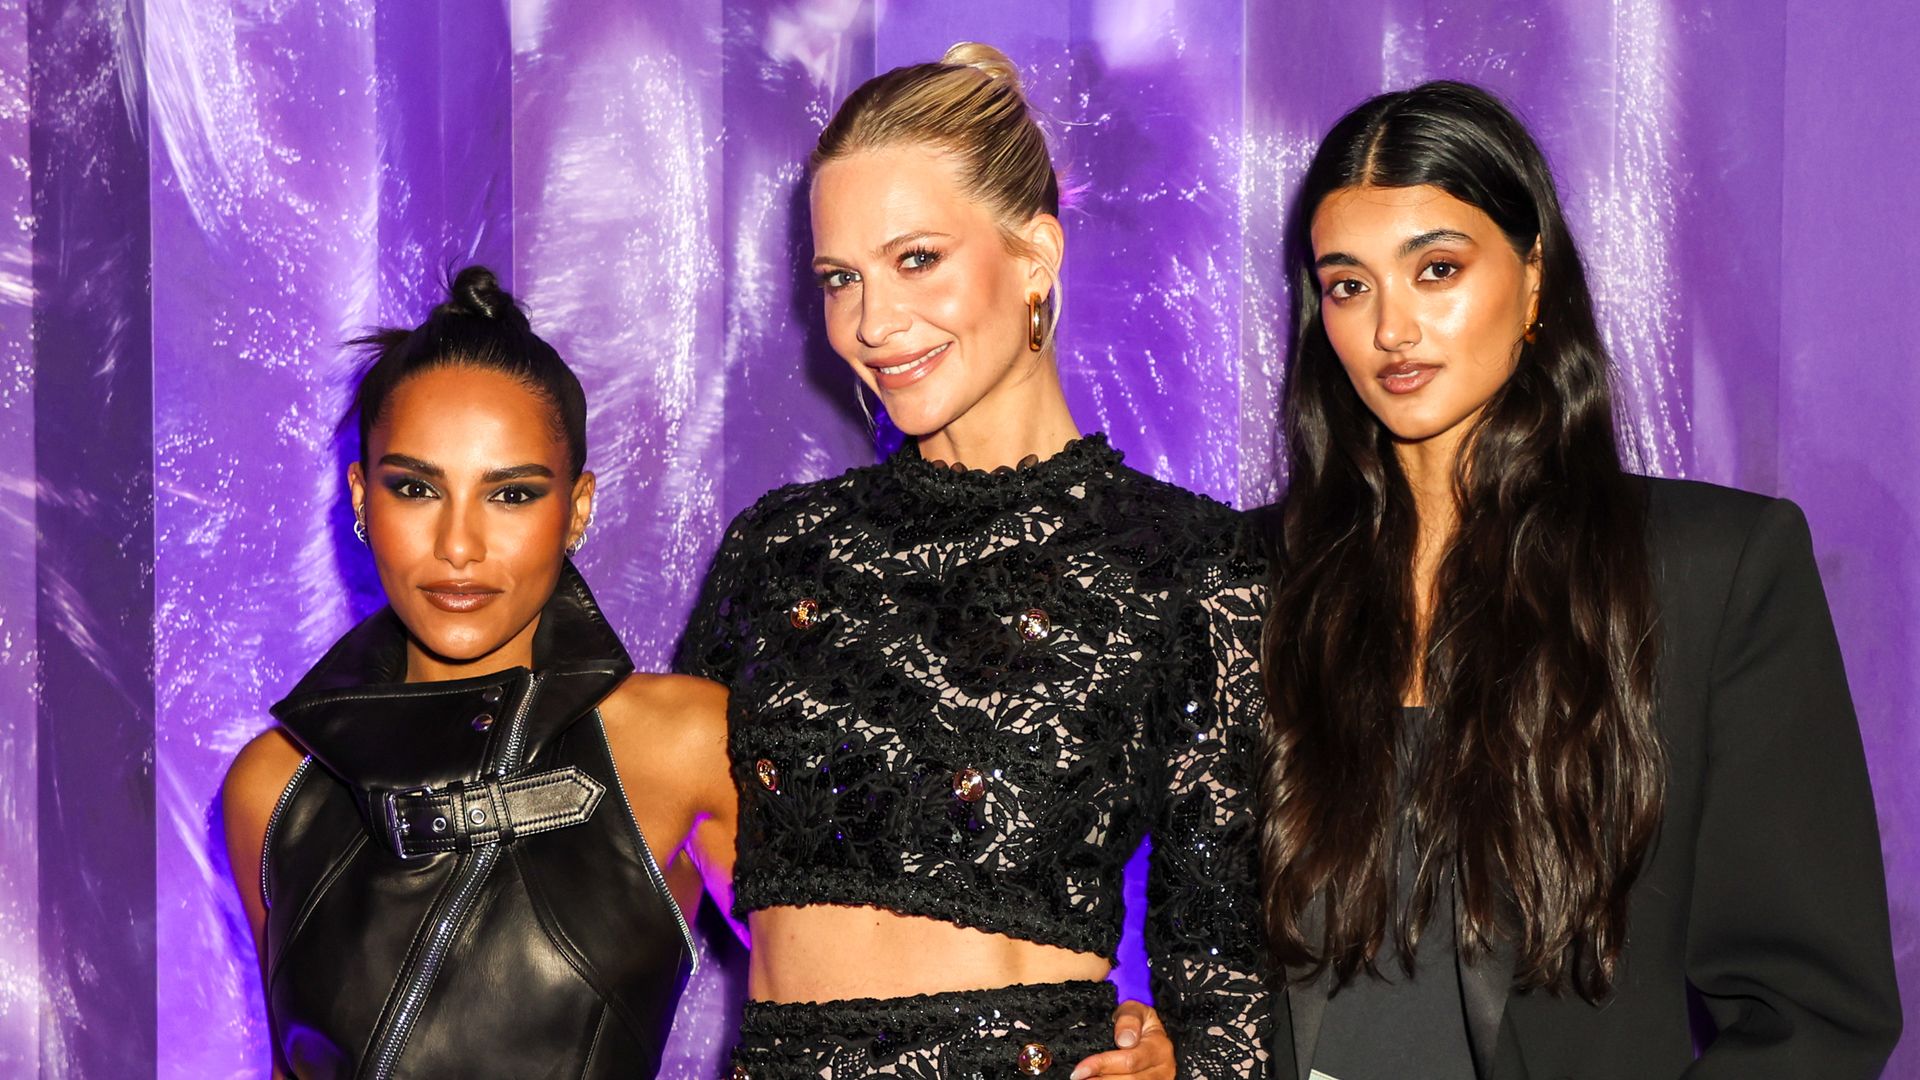 Saffron Hocking, Poppy Delevingne and Neelam Gill attend the House Of Creed "Queen of Silk" Global Launch Party at Tate Modern on April 23, 2024 in London, England. (Photo by Dave Benett/Dave Benett/Getty Images for Creed Fragrances) (Photo by Dave Benett/Dave Benett/Getty Images for Creed Fragrances)